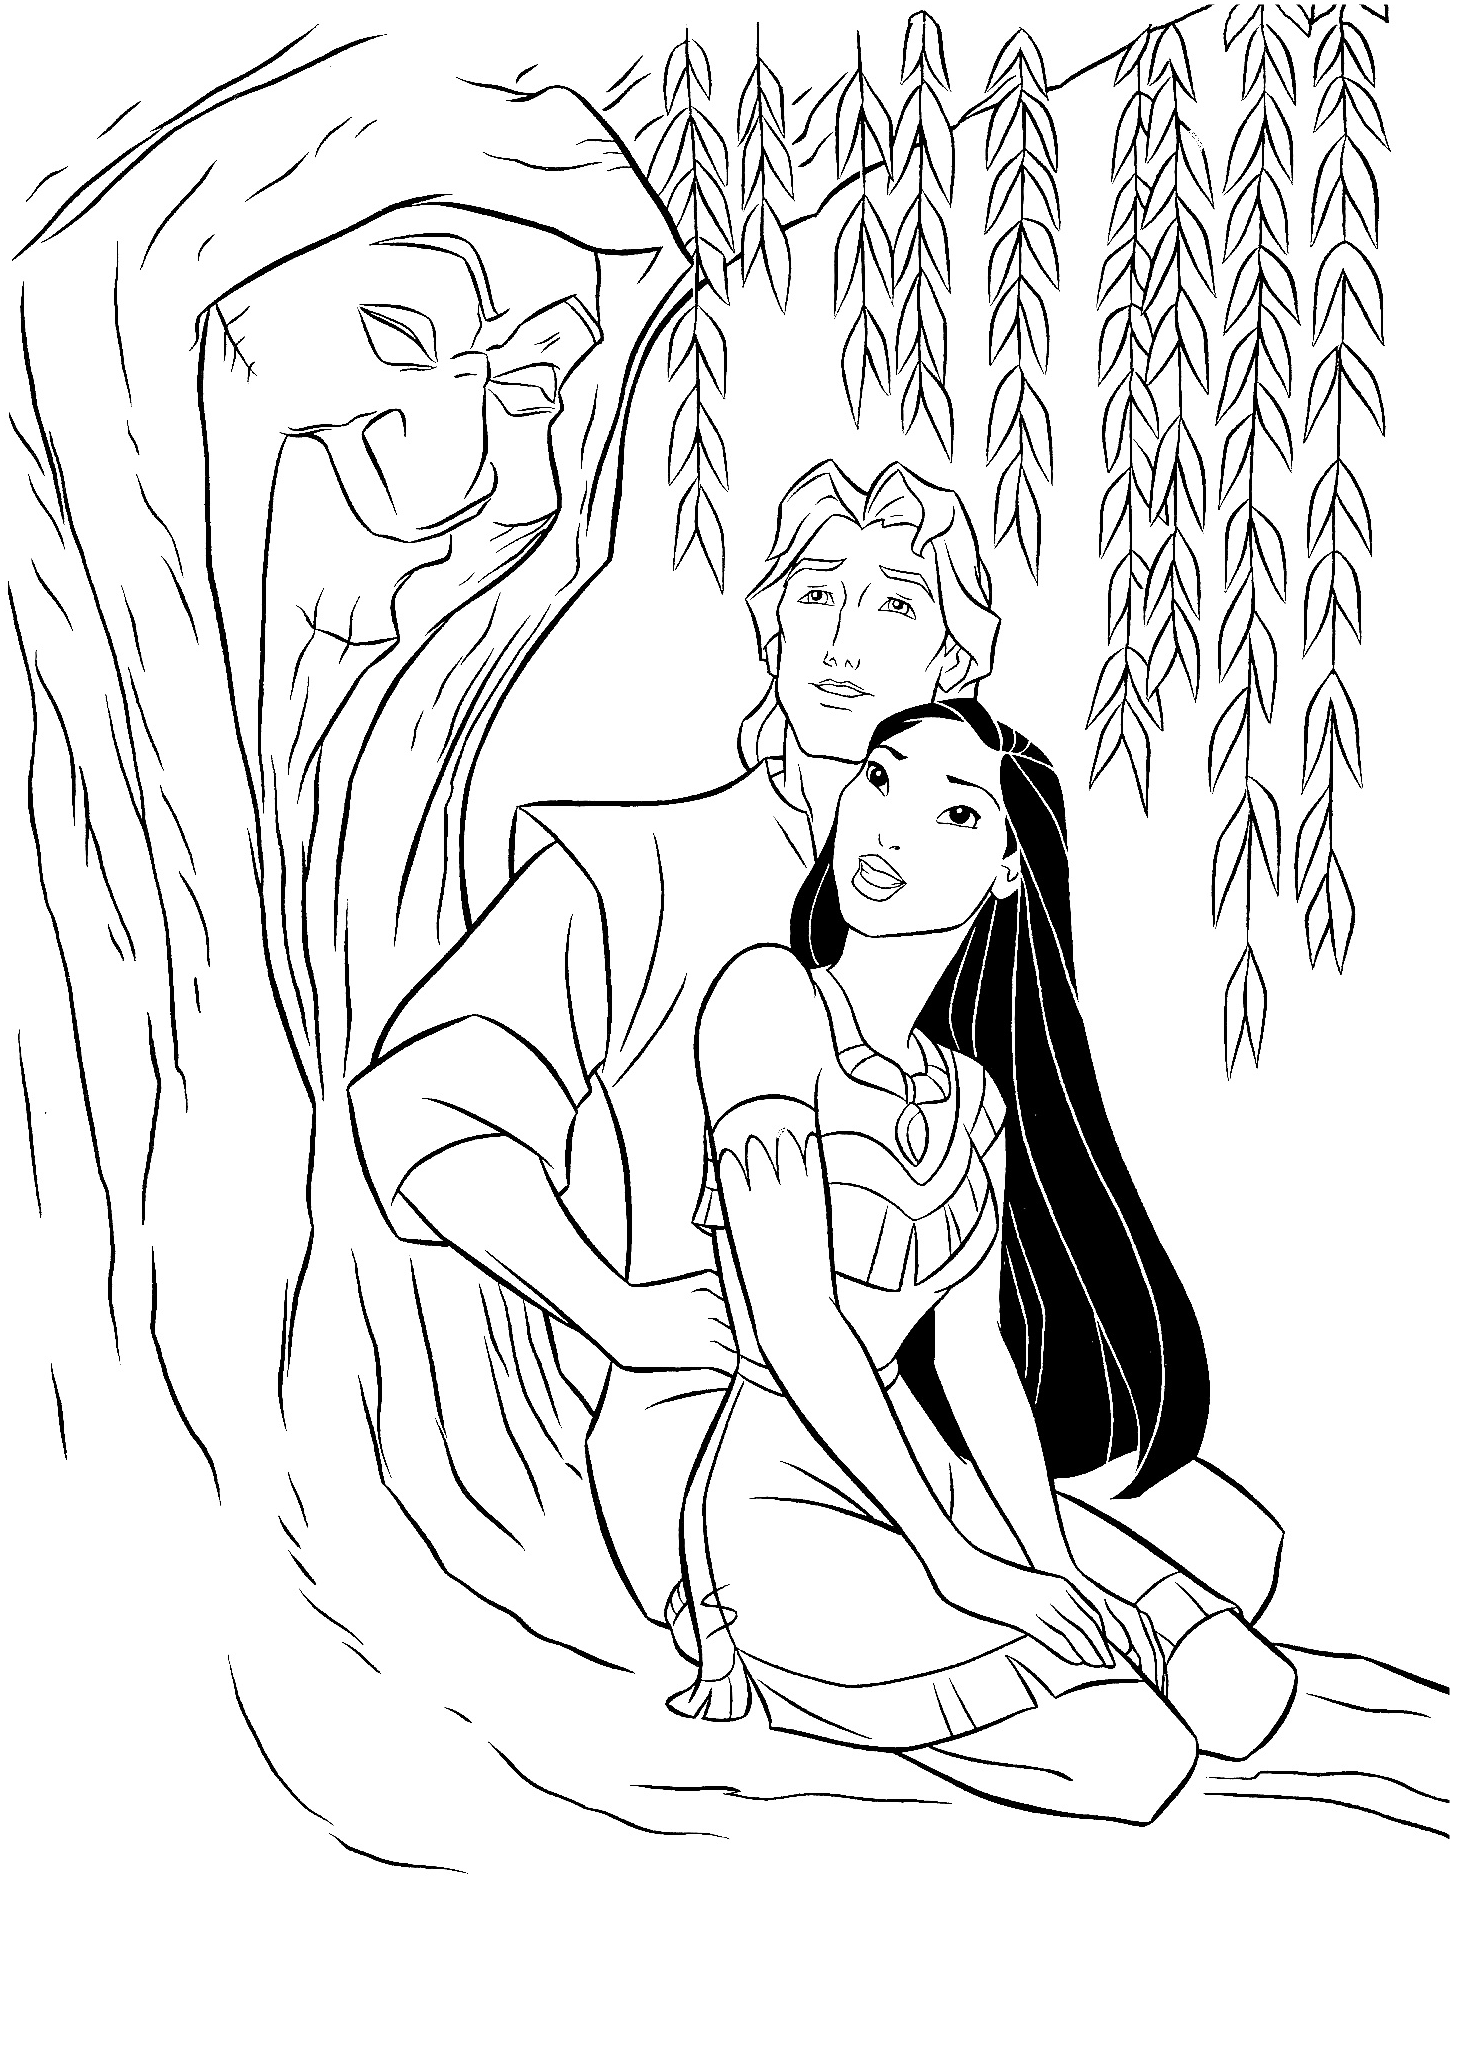 Pocahontas Coloring Pages with Weeping Willow Tree and John Smith